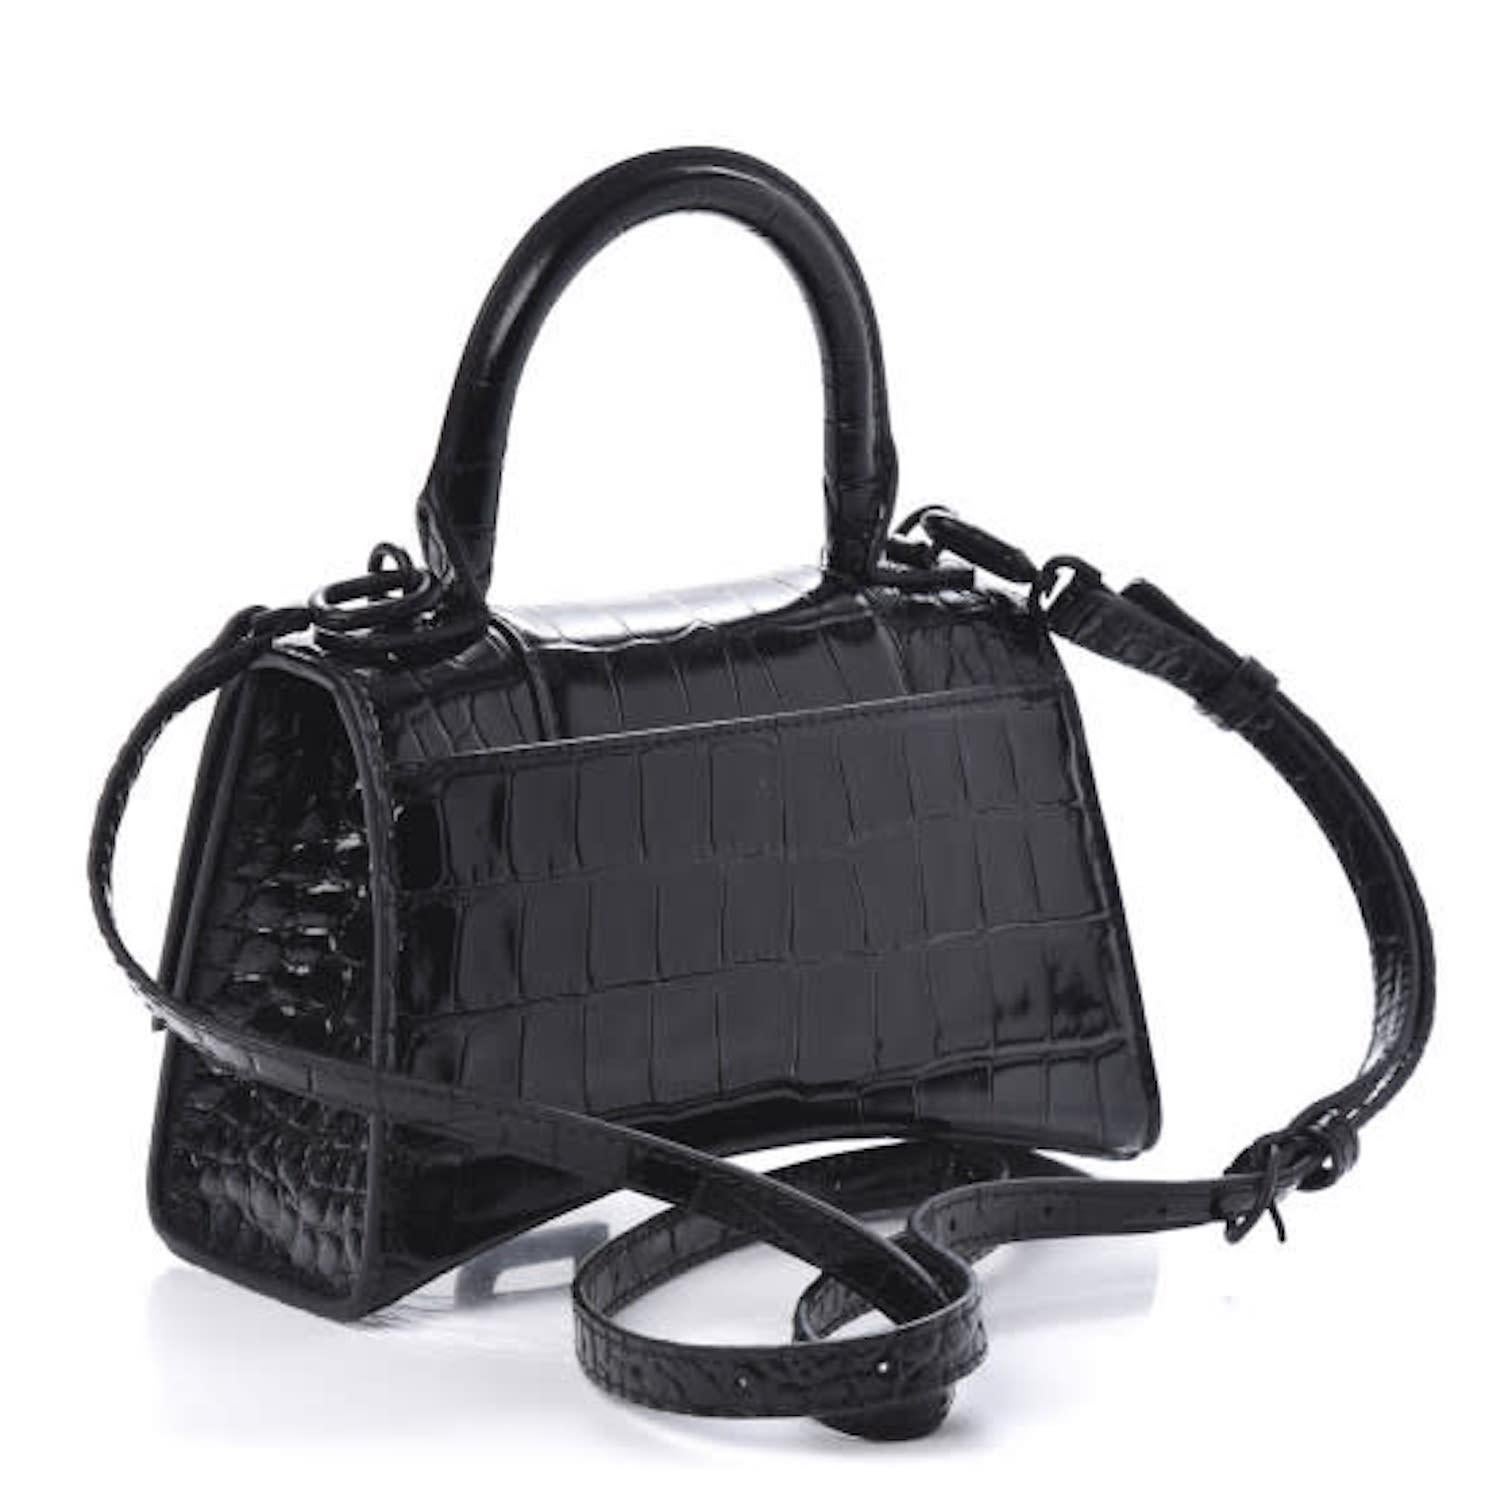 Petite handbag made of crocodile stamped glazed calfskin in black. Features a top handle and an optional shoulder strap. Also features the signature Balenciaga B charm, matte black hardware, and slip pocket at back. 

COLOR: Black
MATERIAL: